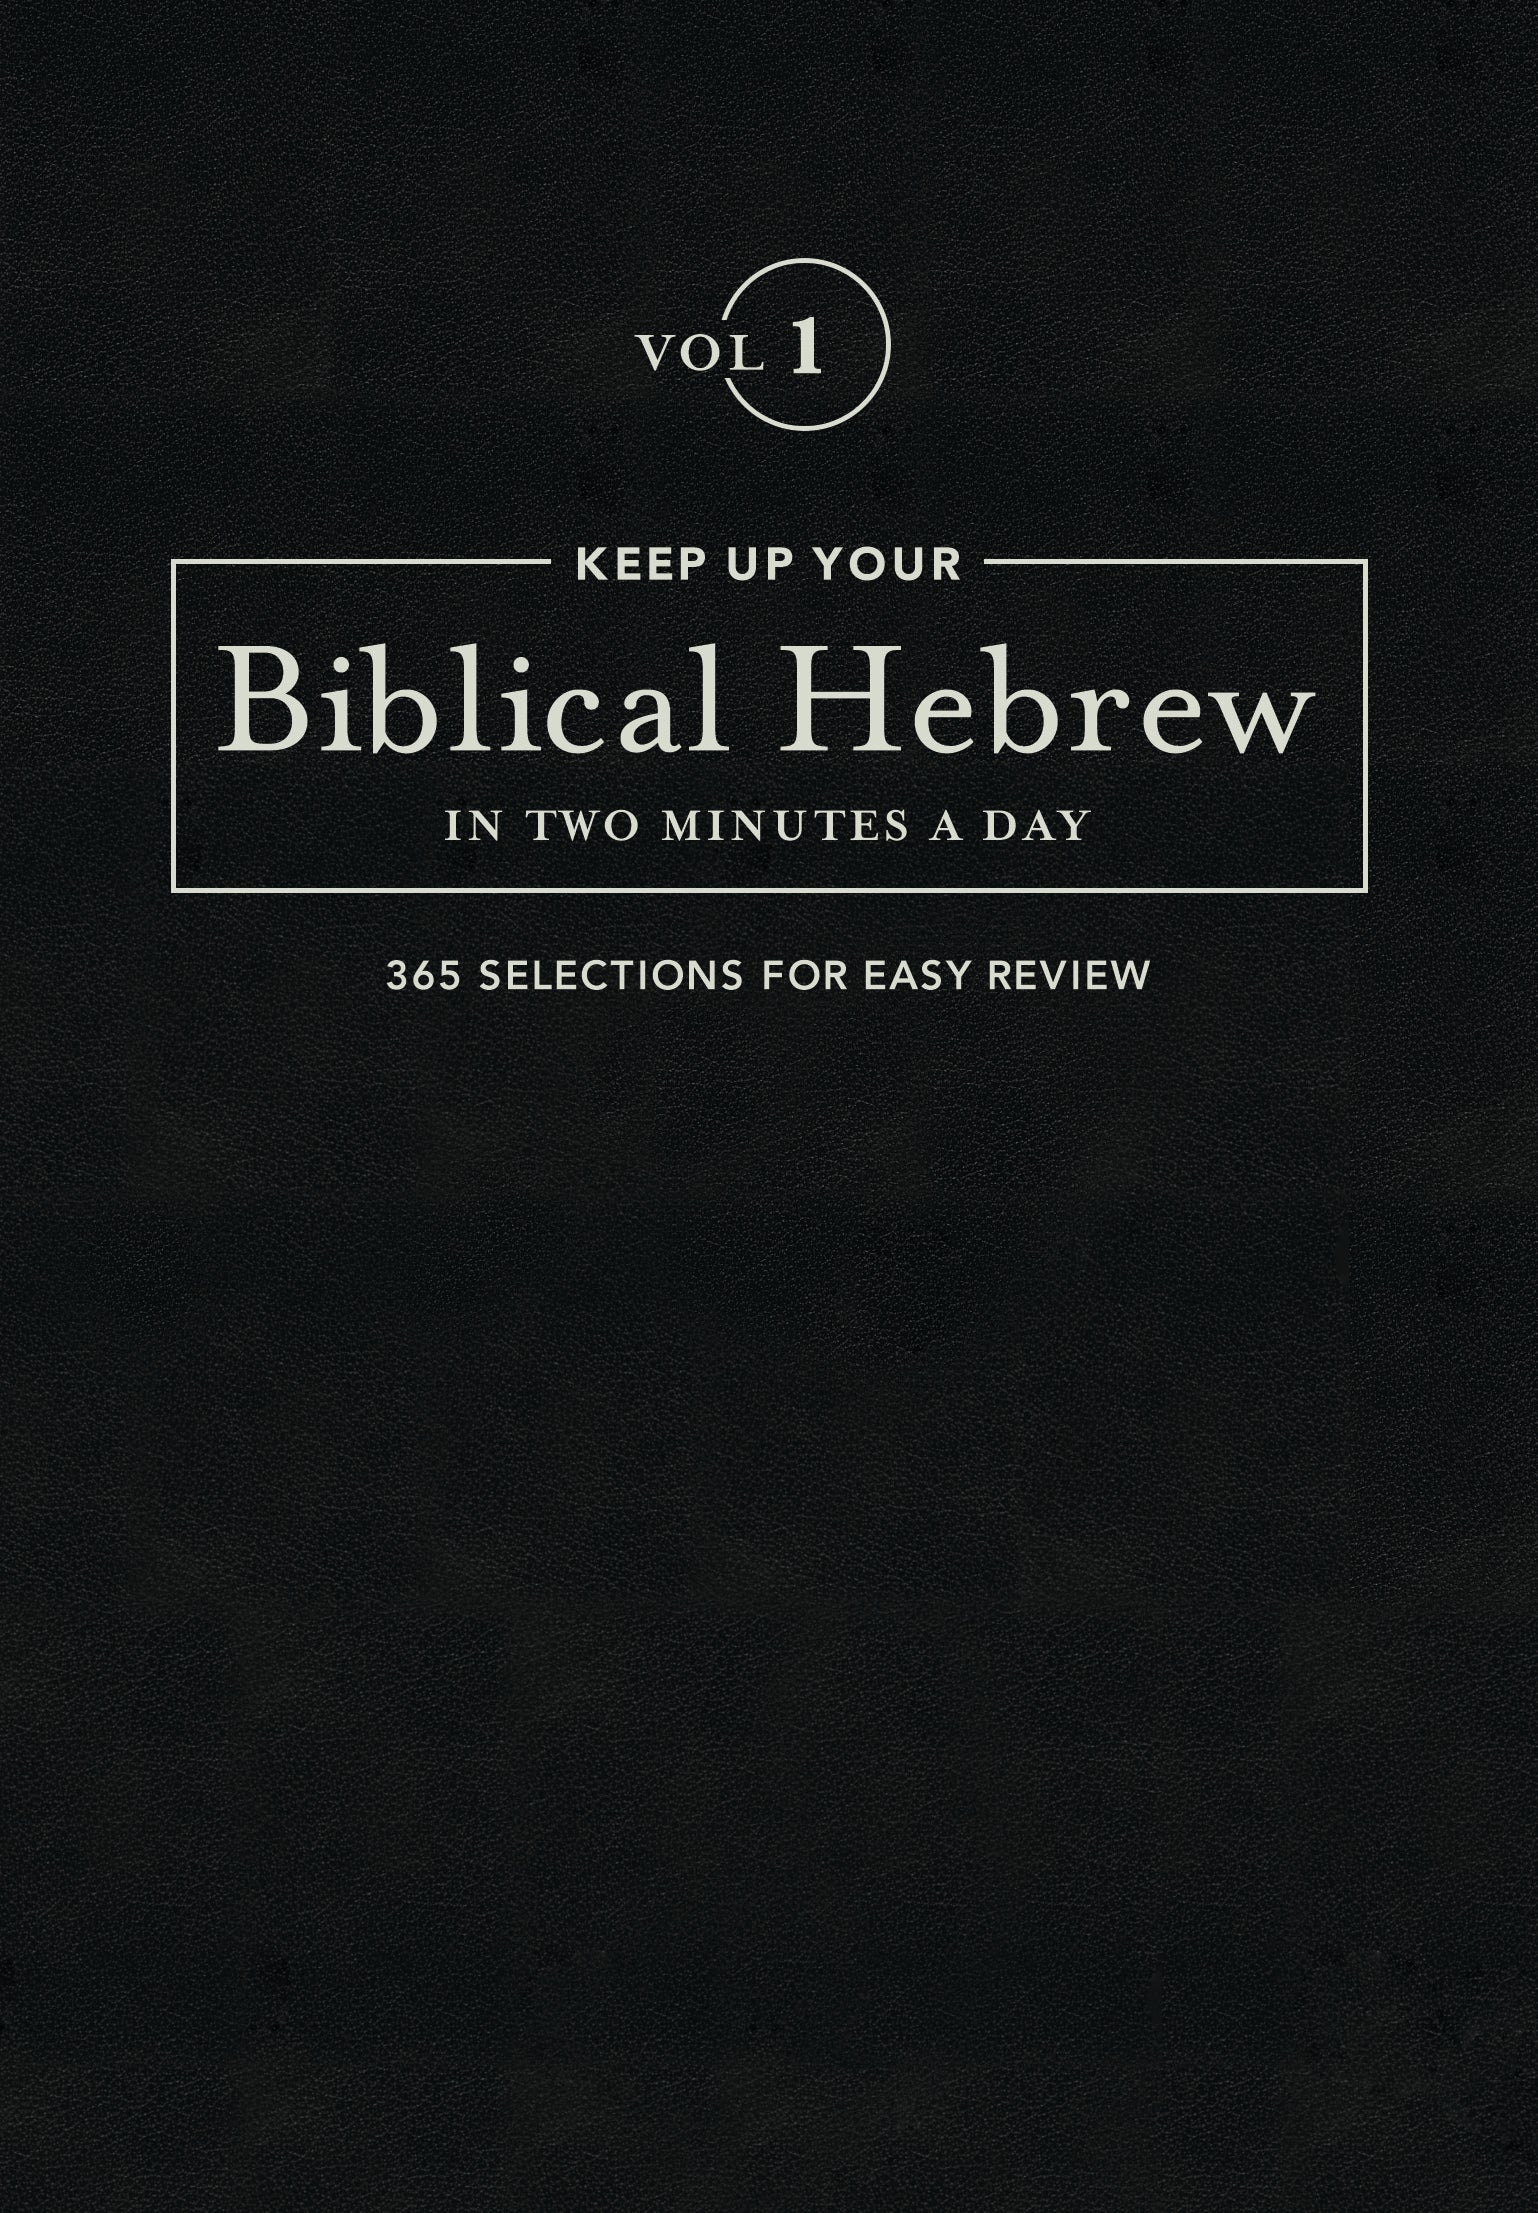 Image of Keep Up Your Biblical Hebrew In Two Minutes A Day Vol. 1 other